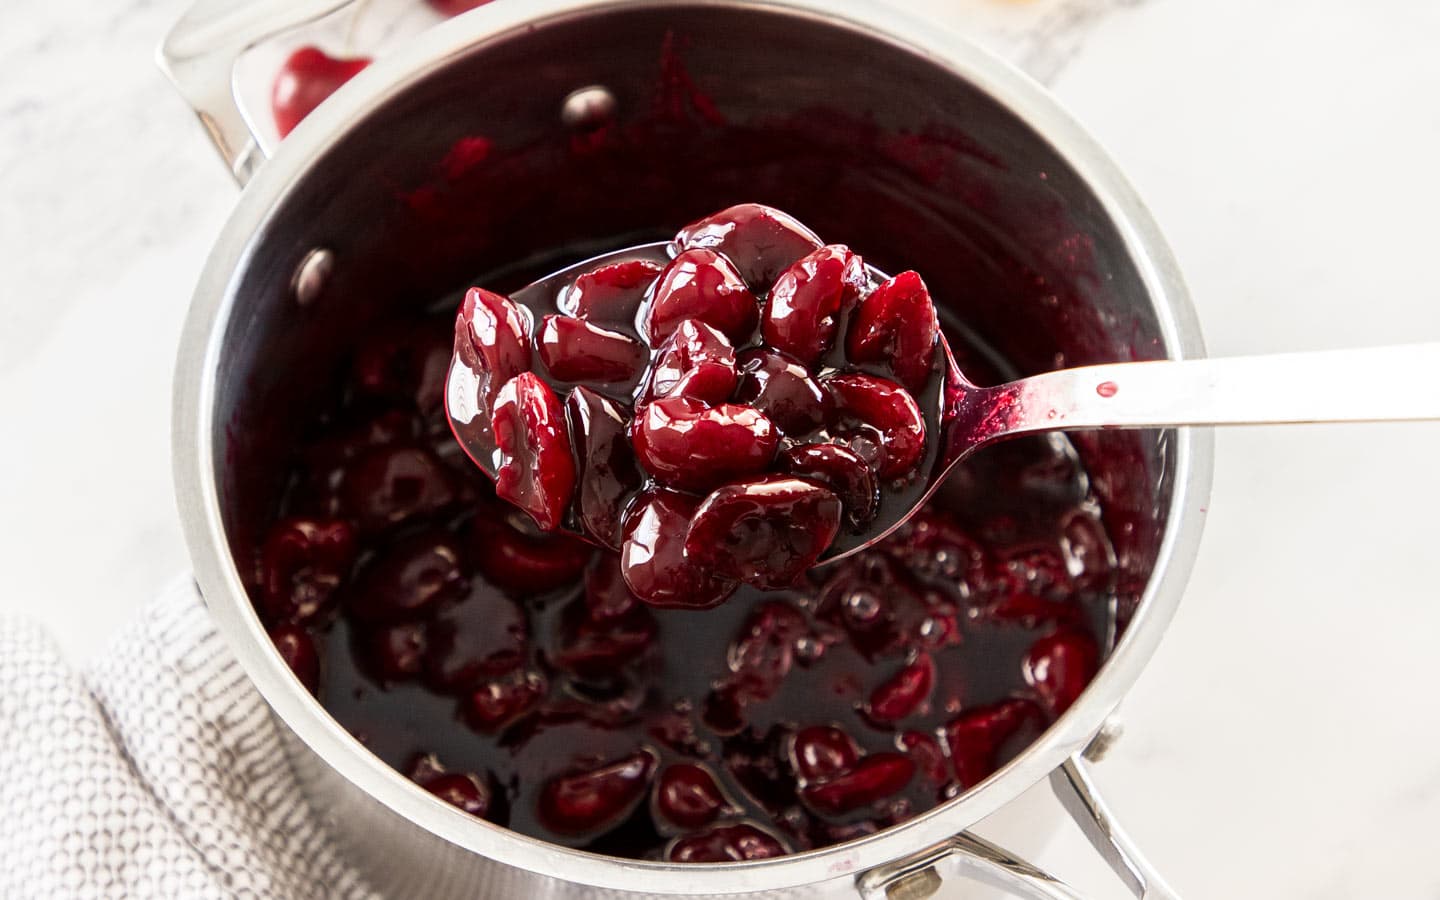 A scoop of cherry sauce being taken from a saucepan.